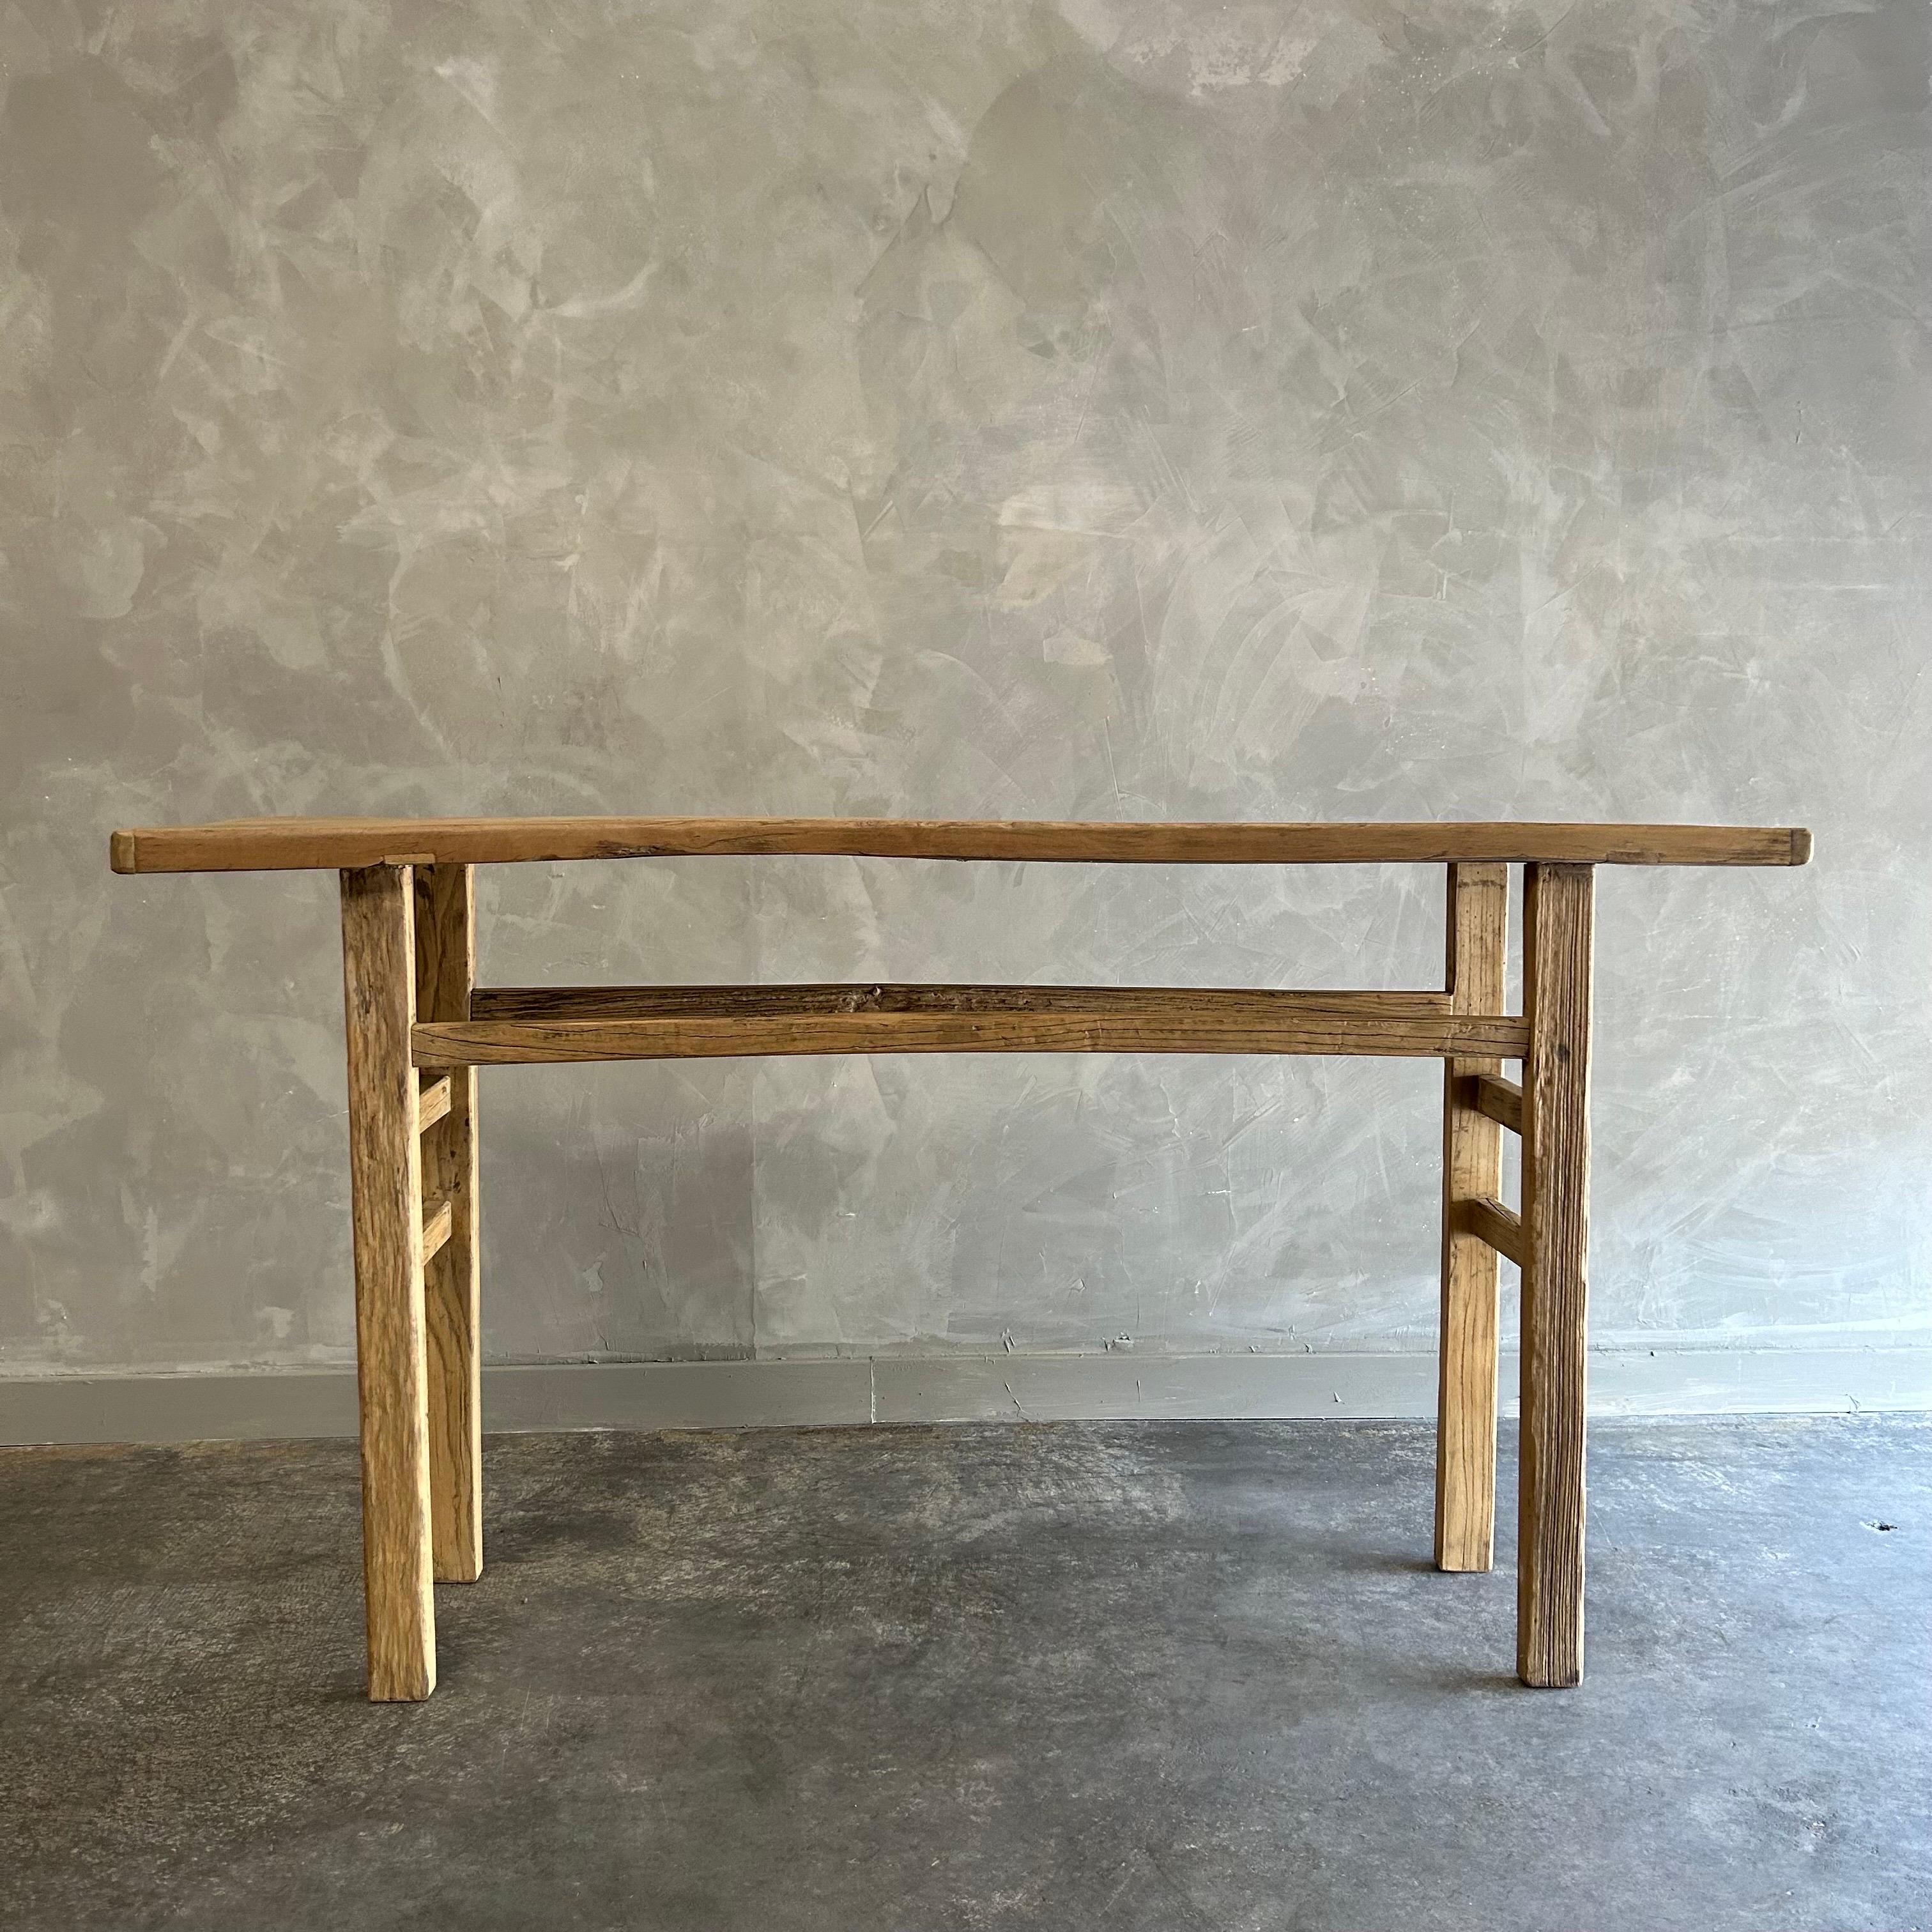 Bloom Home inc has over 2000 items in stock ready for immediate shipping, scroll down to view all of our items!
Elm console 63”w x 14”d x 34”h
Vintage Antique Elm Wood Console Table Made from Vintage reclaimed elm wood. Beautiful antique patina,